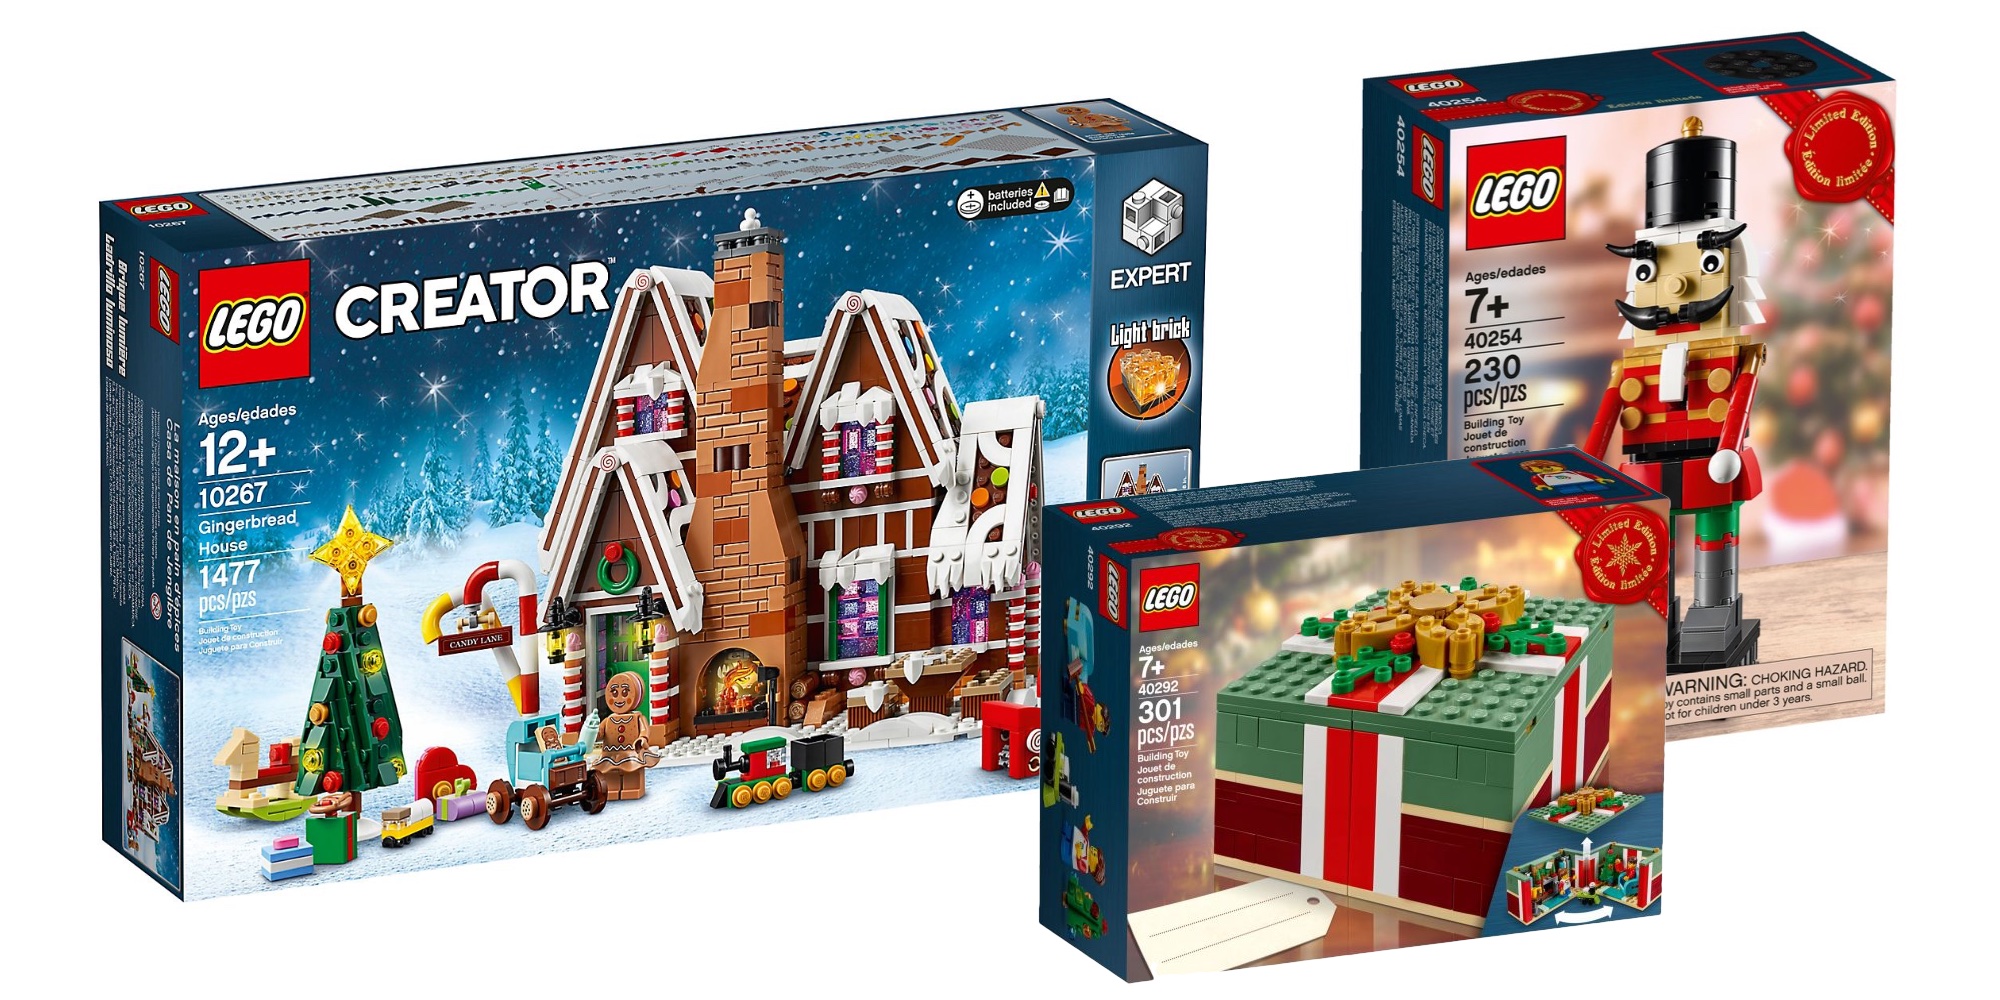 lego-black-friday-predictions-exclusives-freebies-more-9to5toys